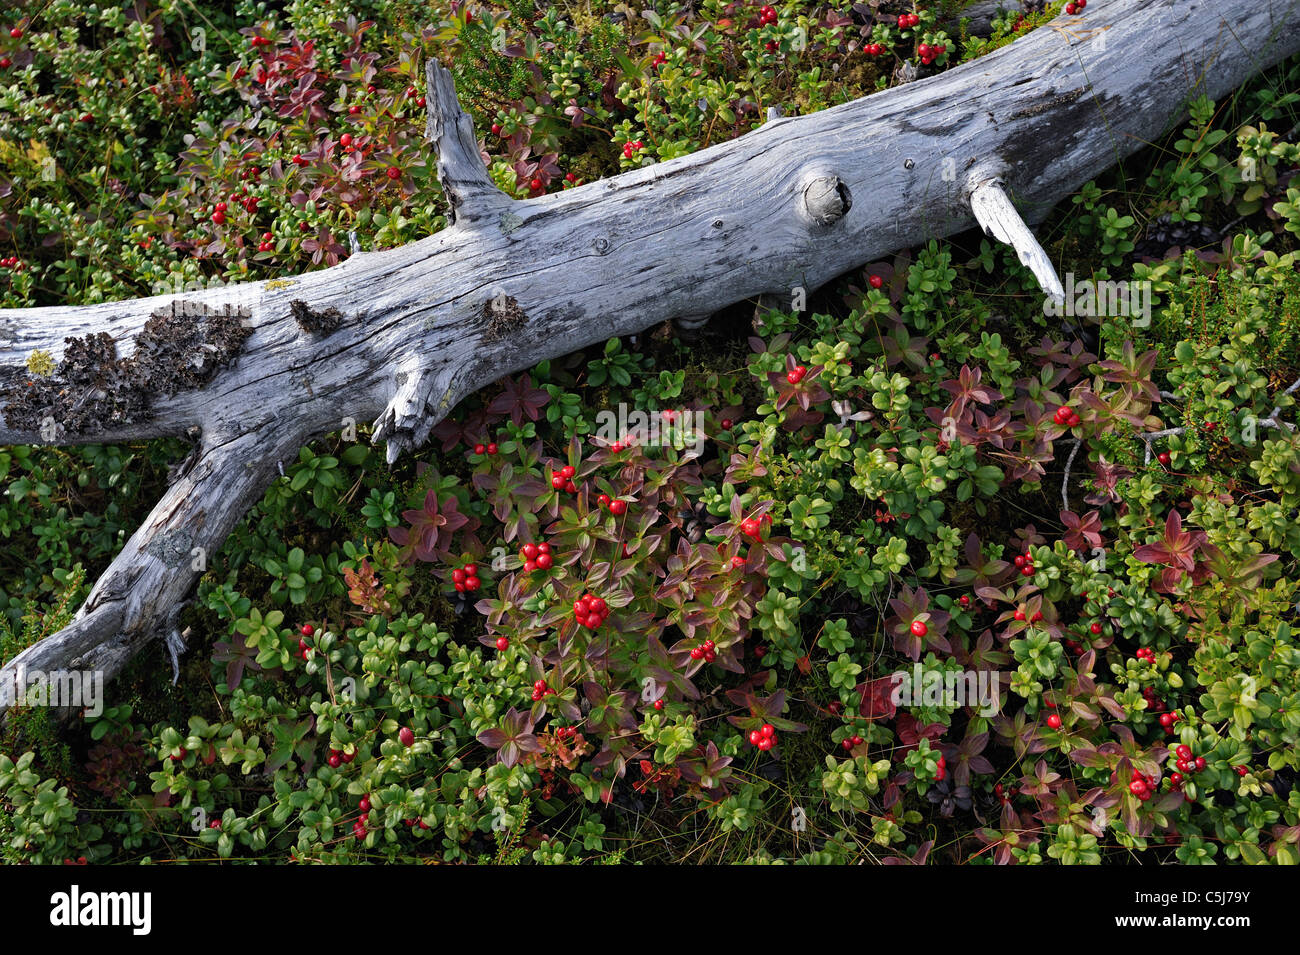 An arctic garden of bearberry and other dwarf shrubs with a dead pine branch near Fauske, Norway. Stock Photo